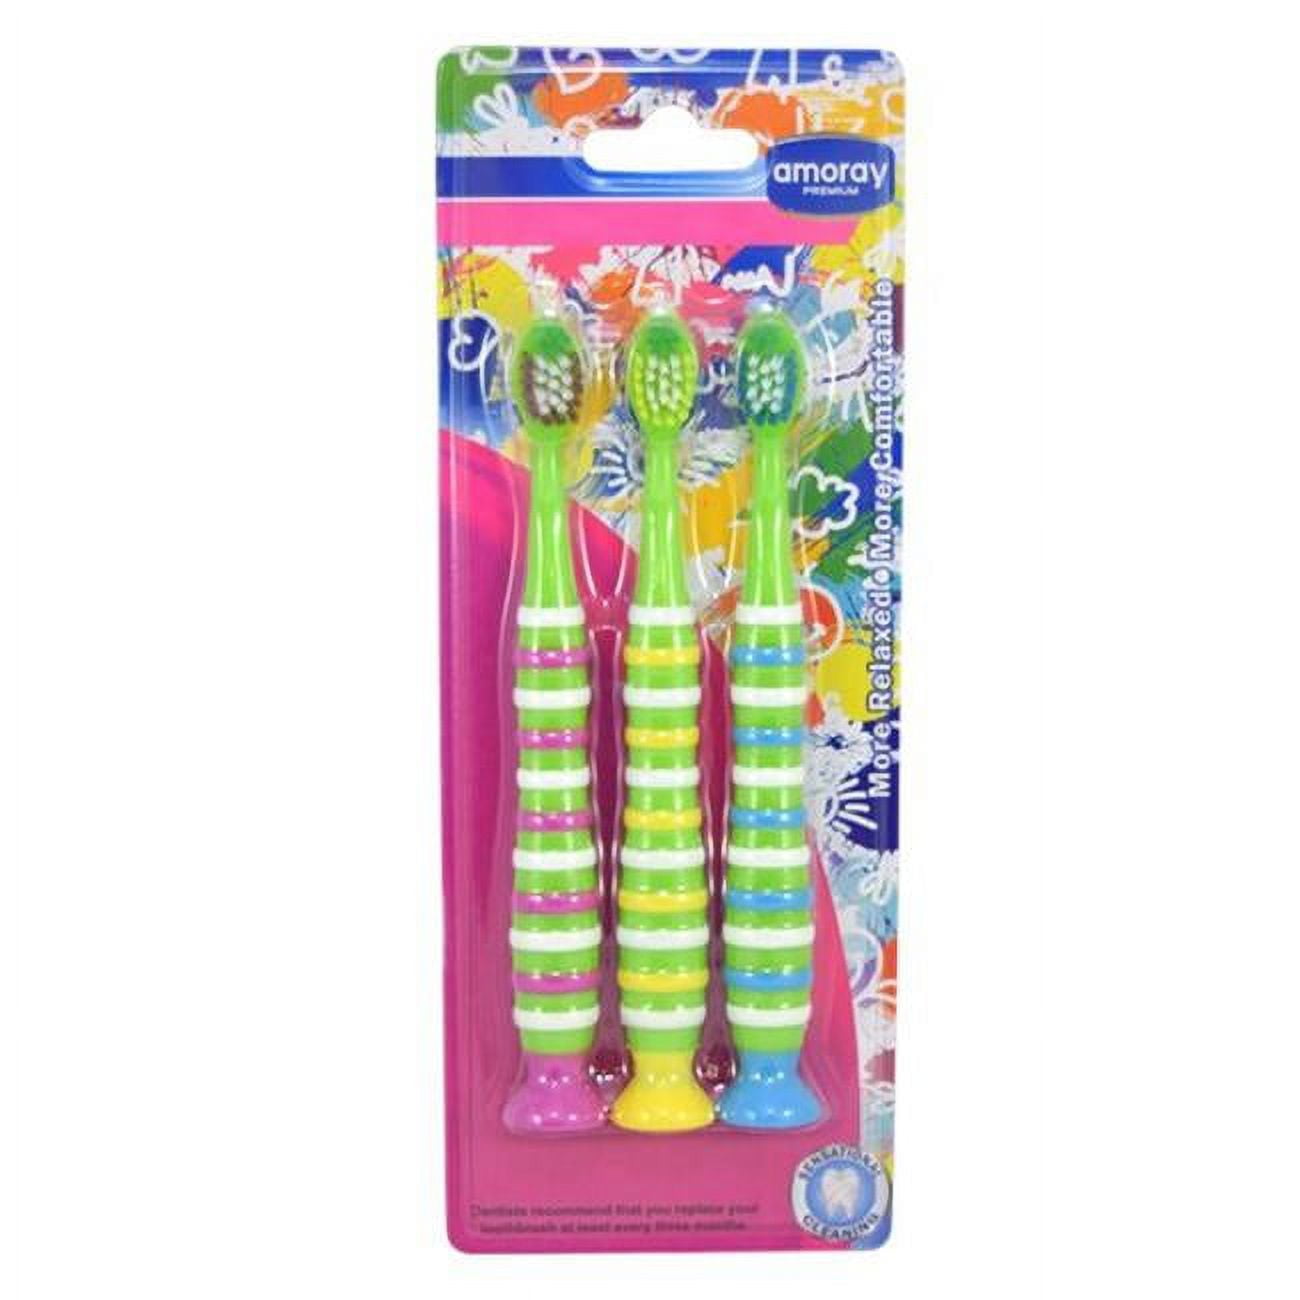 Picture of DDI 2303266 Amoray Kids Toothbrush - 3 Pack  Suction Cup Base Case of 96